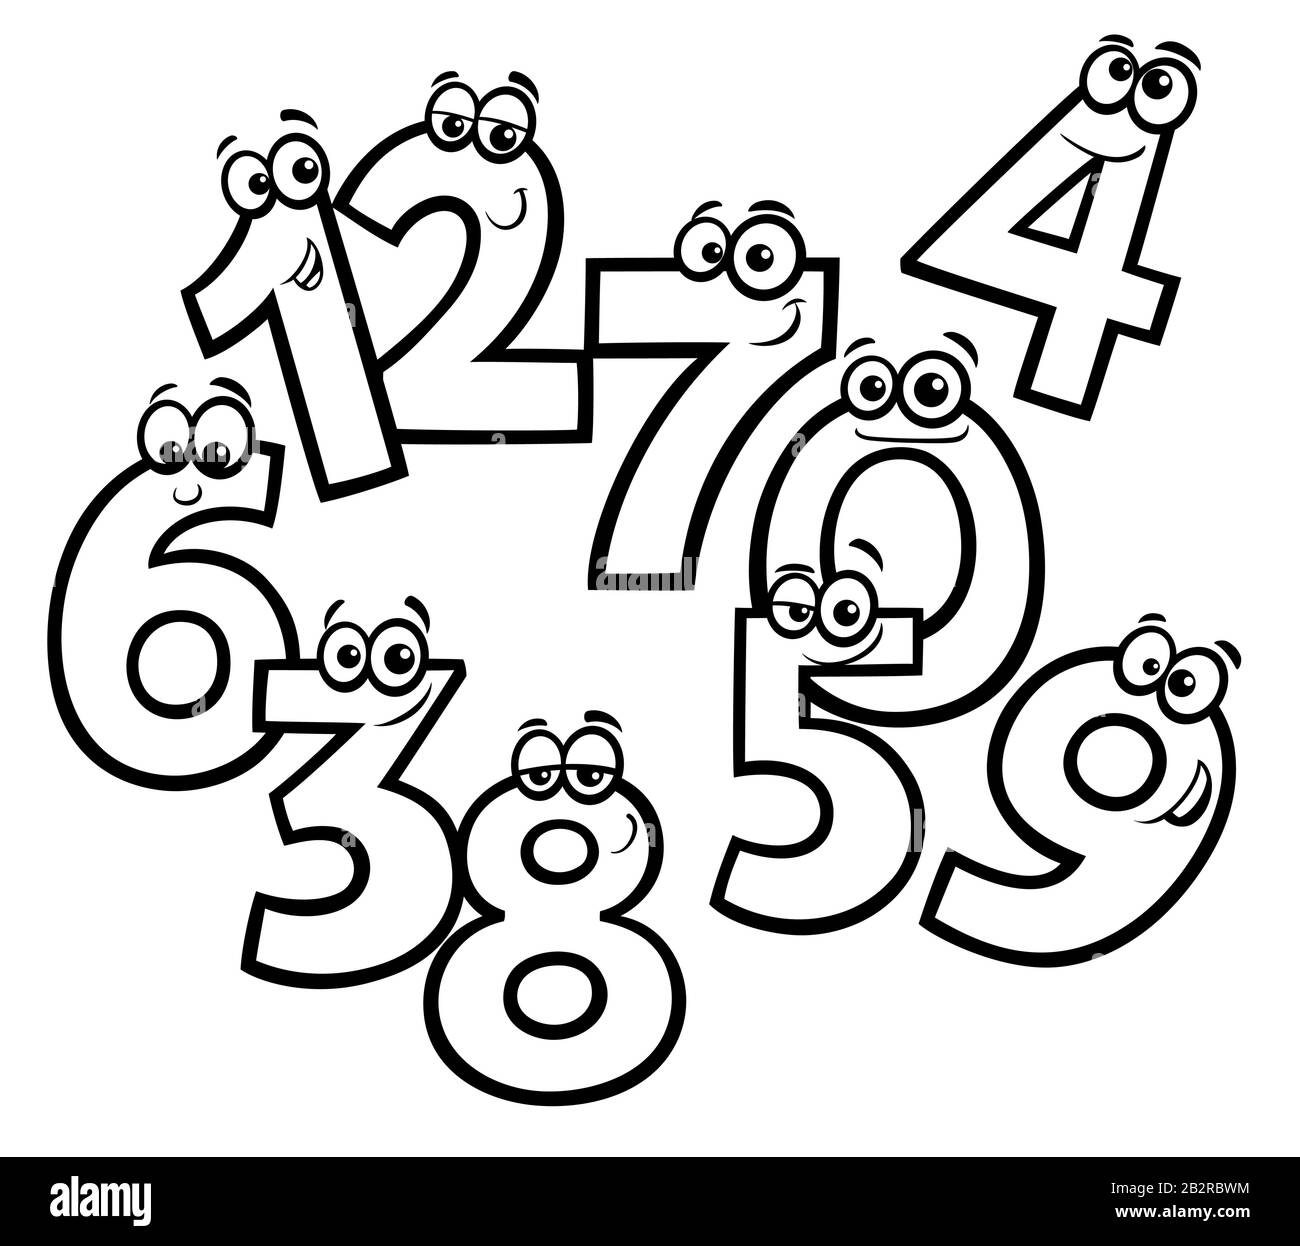 Mathematics funny drawing maths Black and White Stock Photos & Images -  Alamy